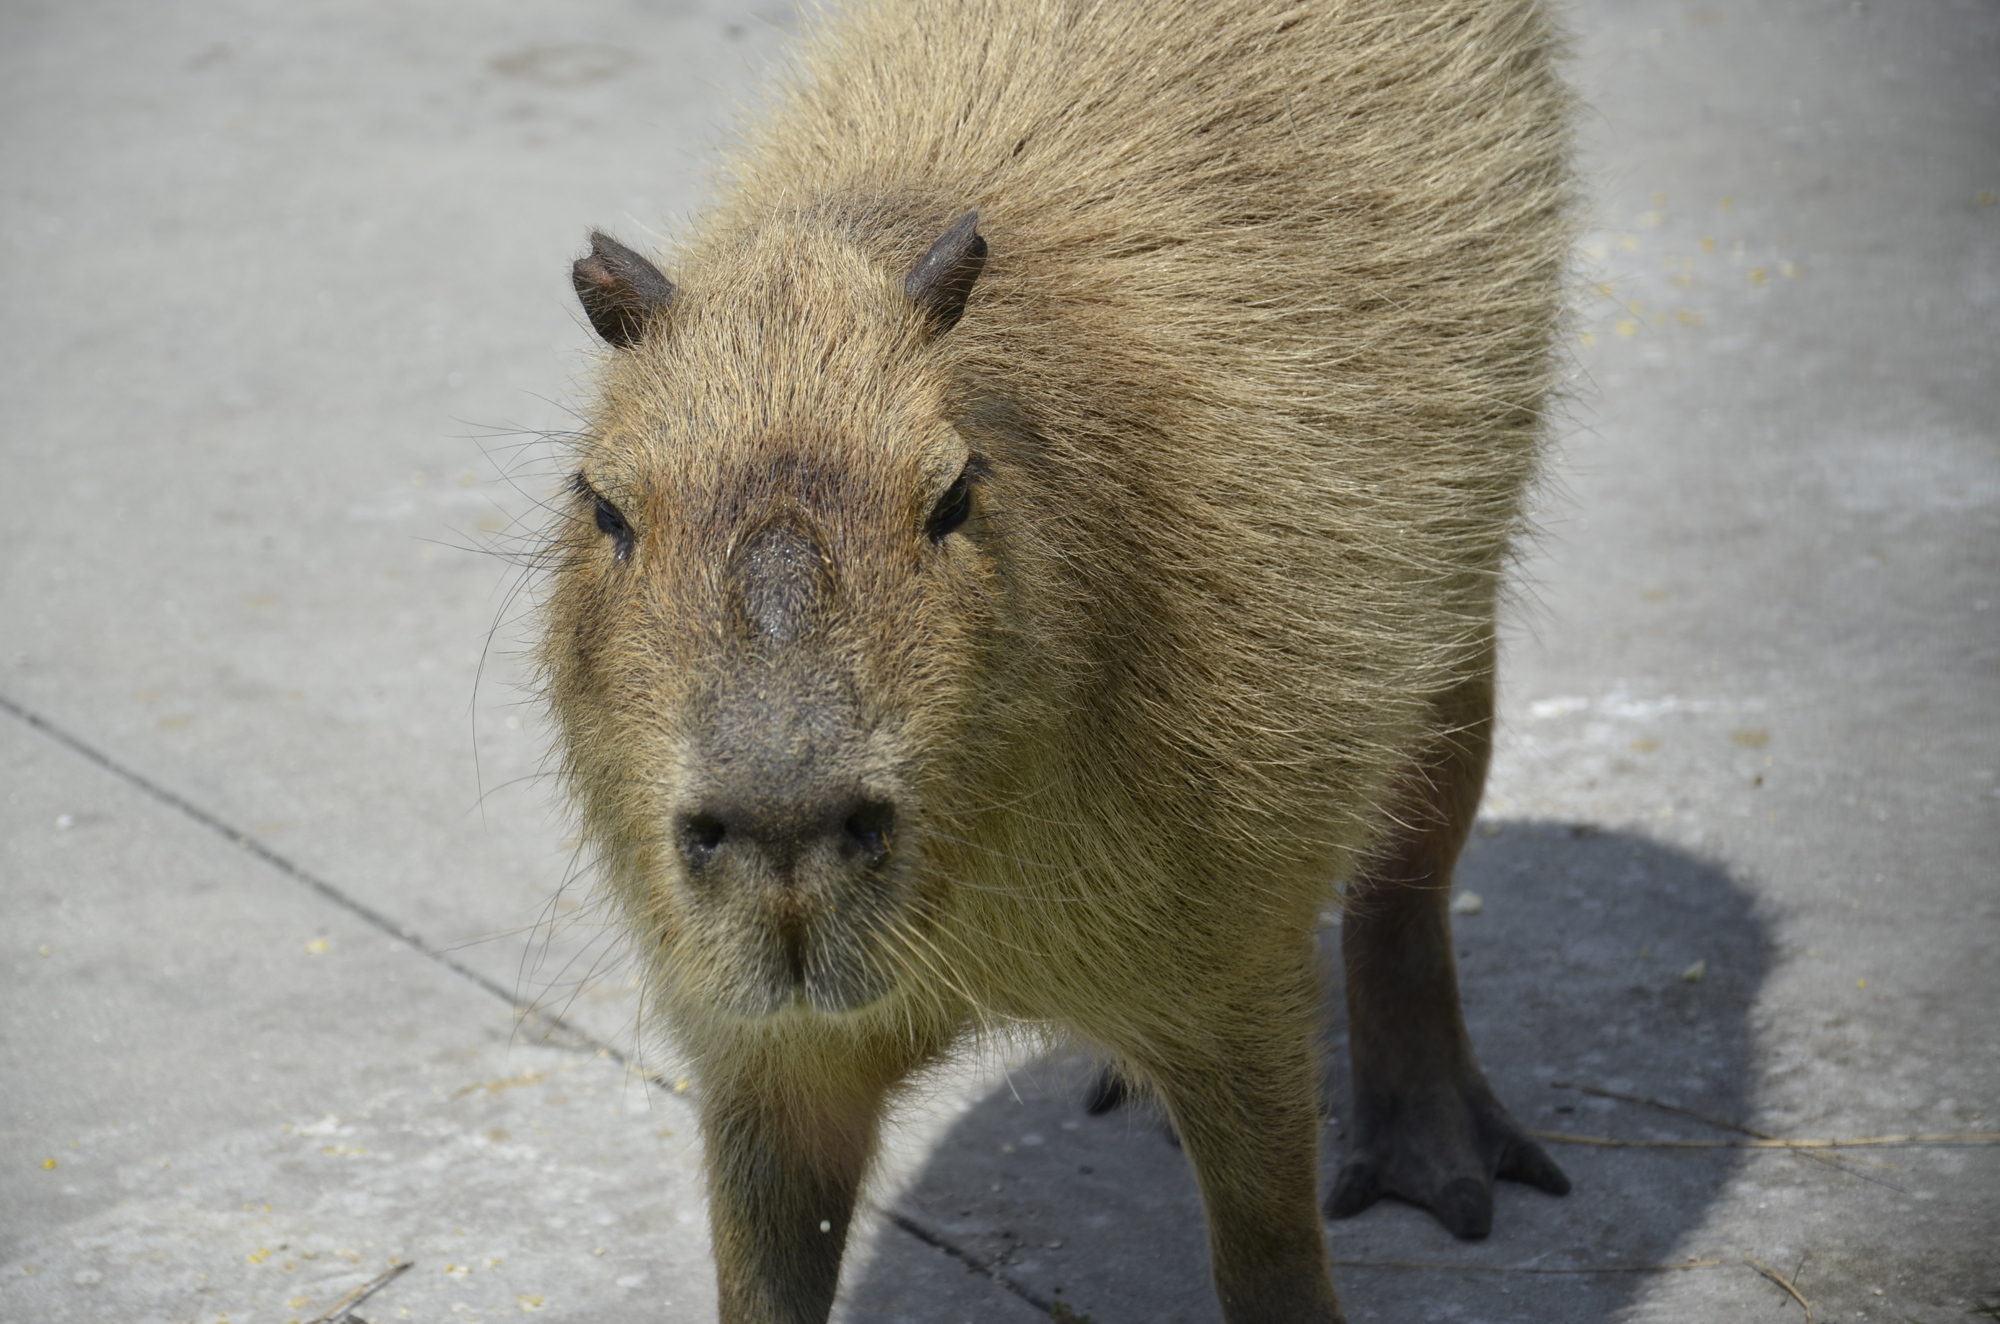 Bob the Capybara is an eligible 3- to 4-year-old bachelor looking for companionship at Big Cat Habitat and Gulf Coast Sanctuary.